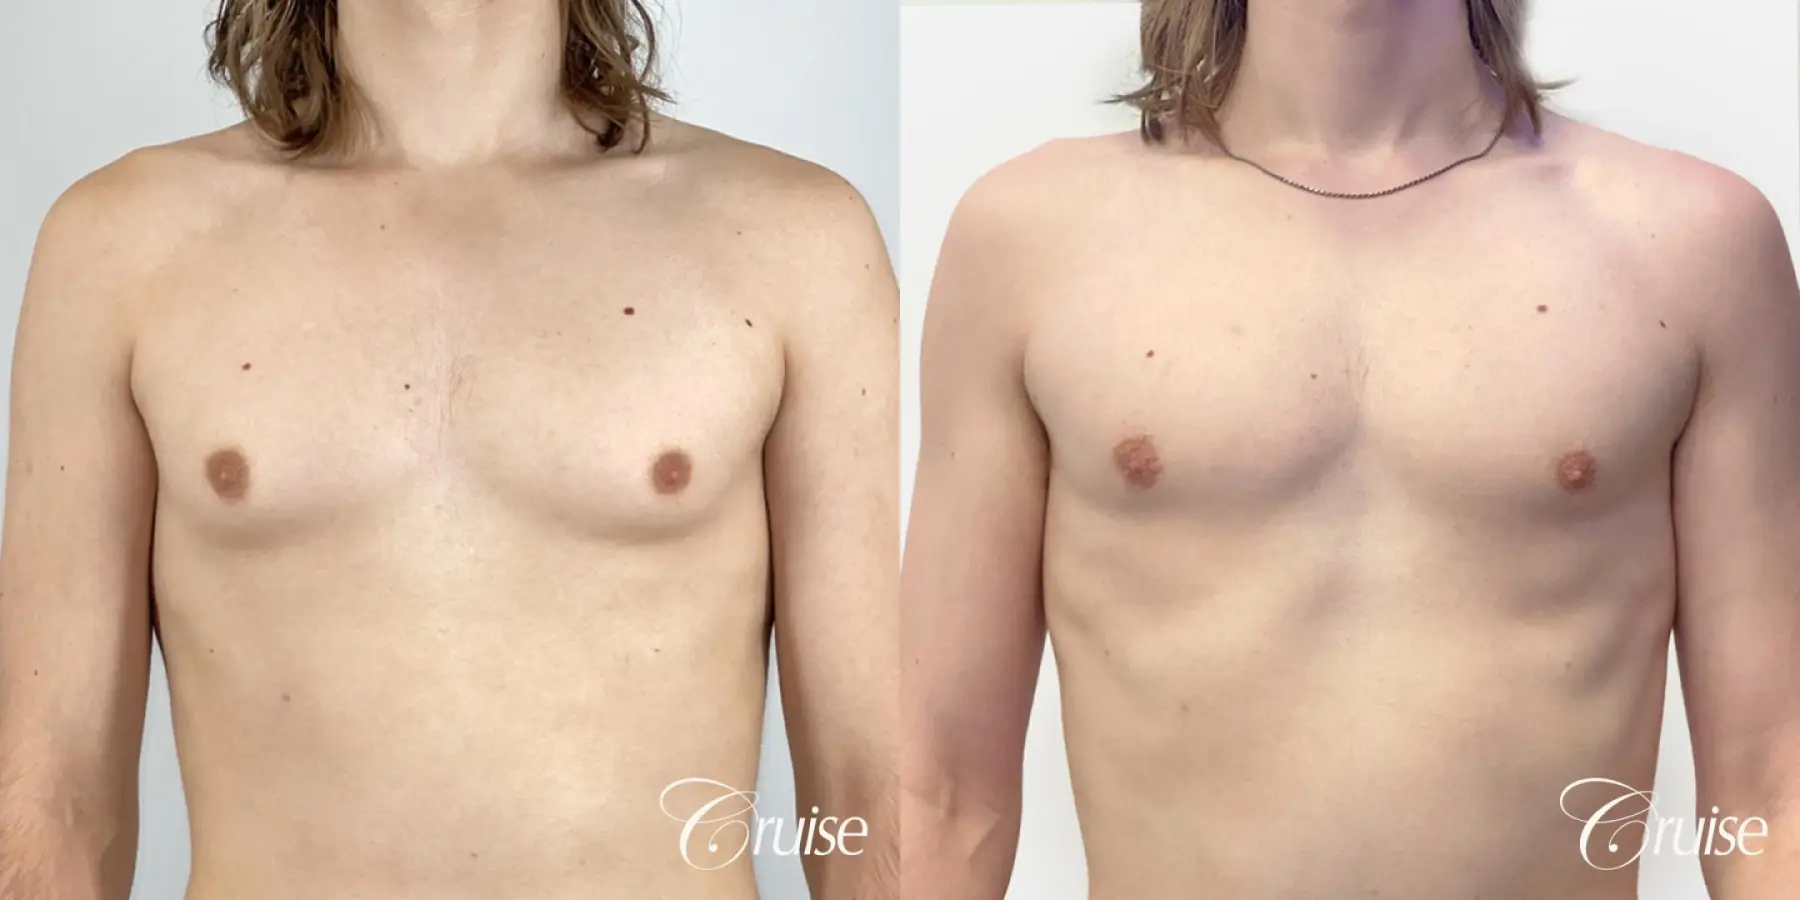 Type 1 Gynecomastia Removal - Before and After